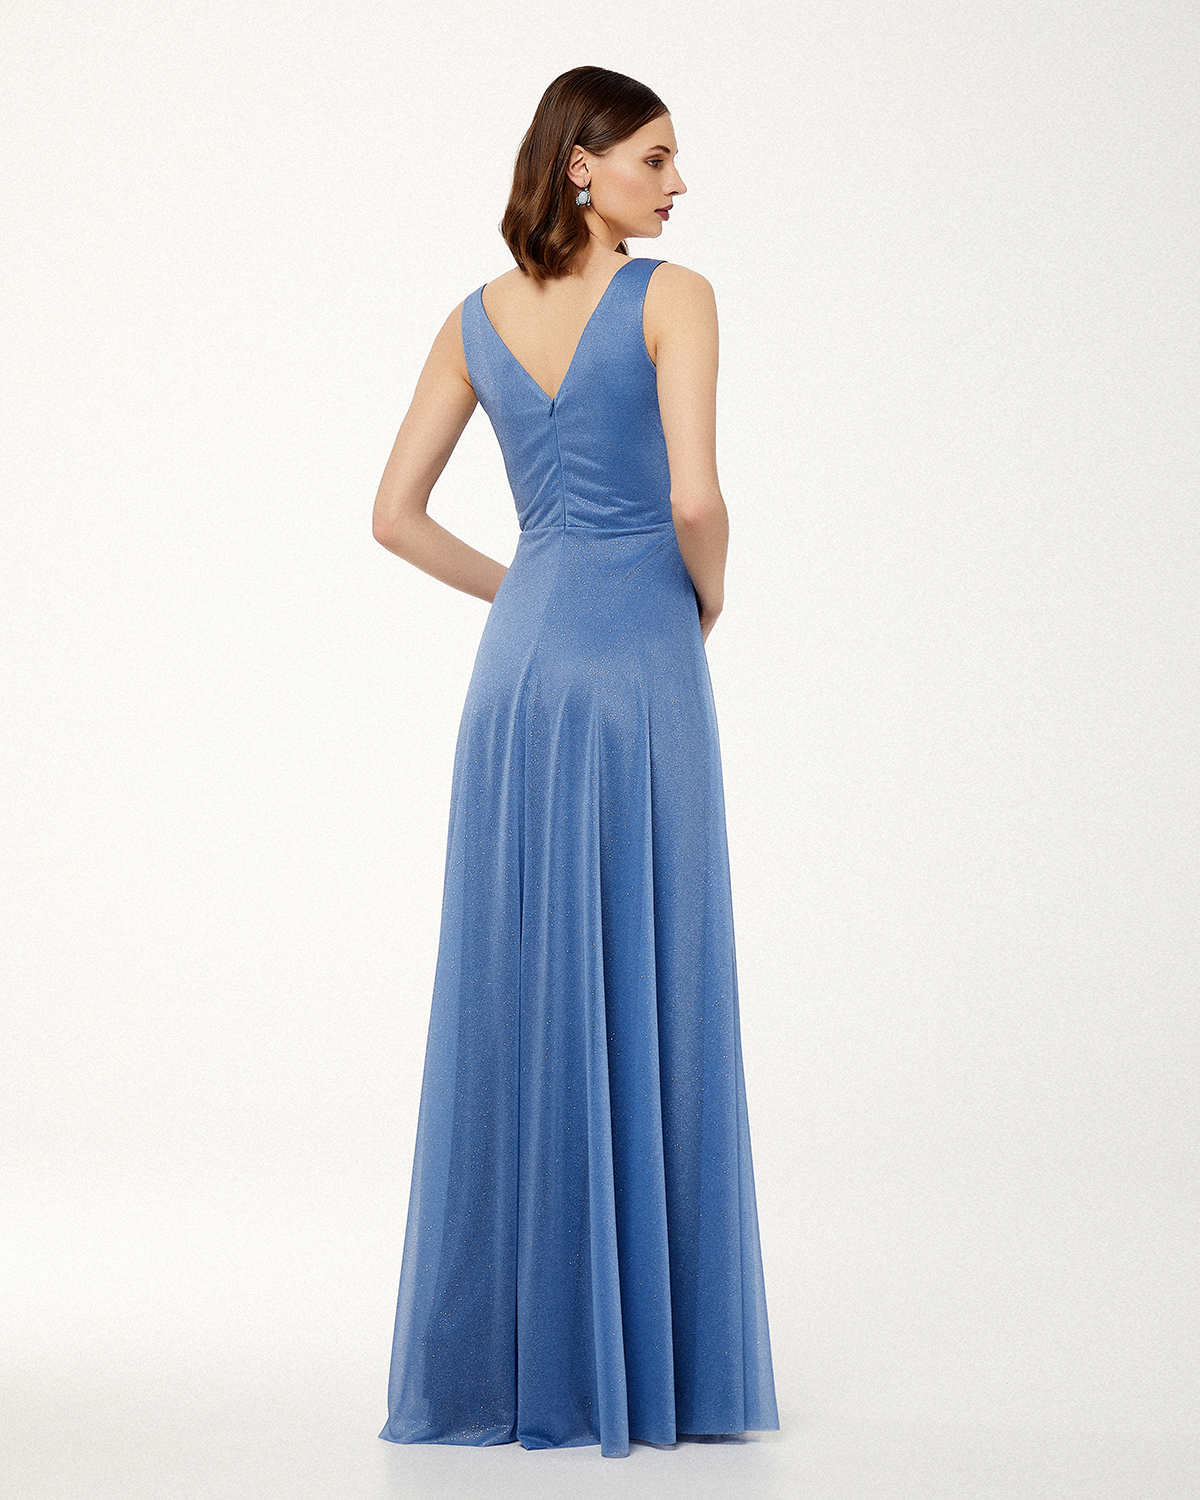 Long cocktail dress with shining fabric and straps